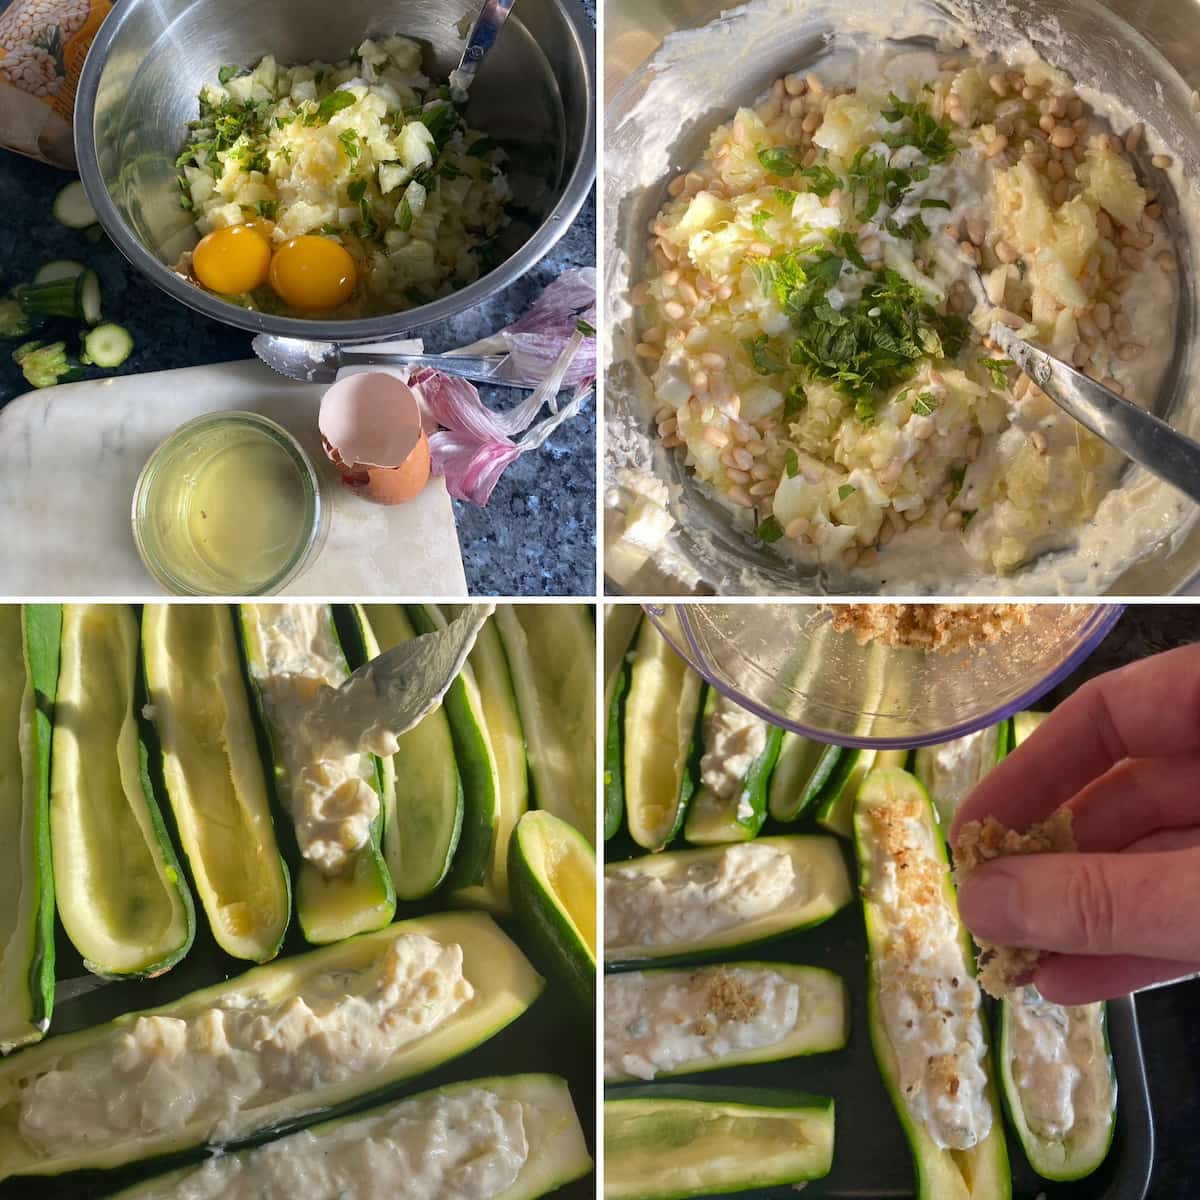 mixing courgette pulp with egg yolks, pine nuts, cheese and herbs and topping zucchini boats with breadcrumbs